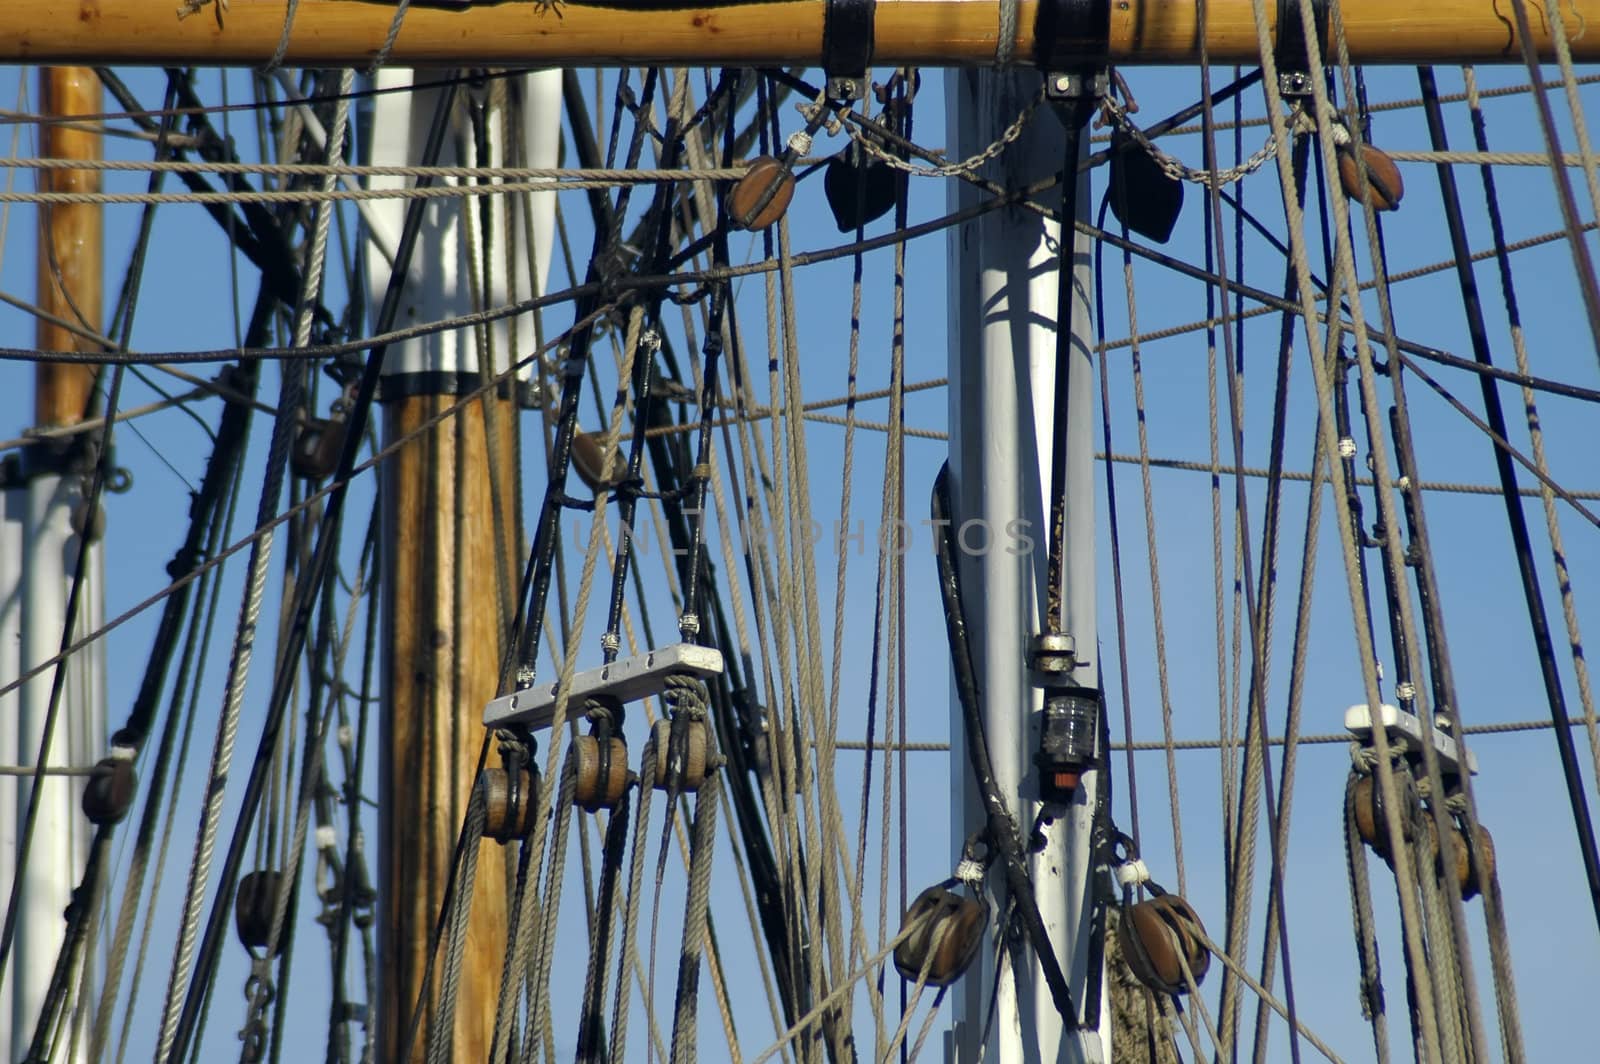 ship mast detail photo, several ropes and blocks/rollers